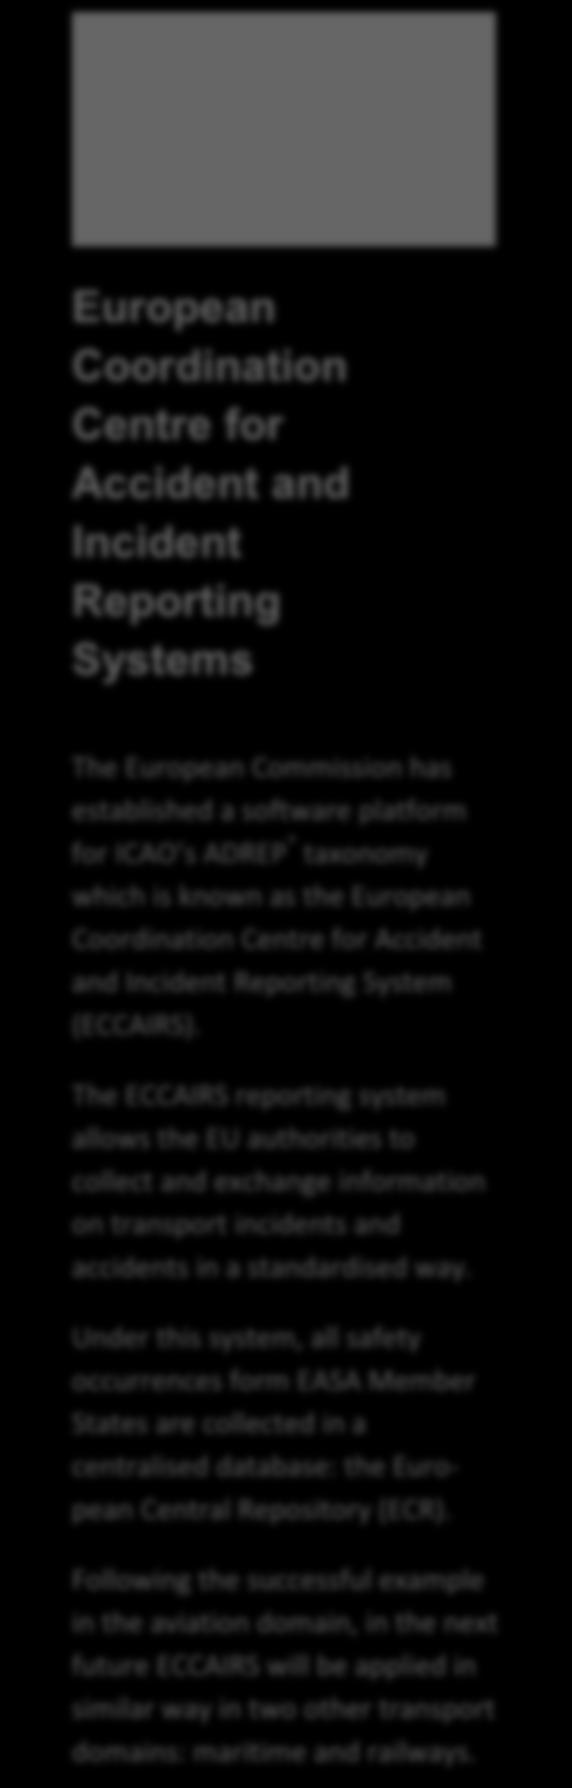 3. ECCAIRS ECCAIRS stands for the European Coordination Centre for Accident and Incident Reporting System.